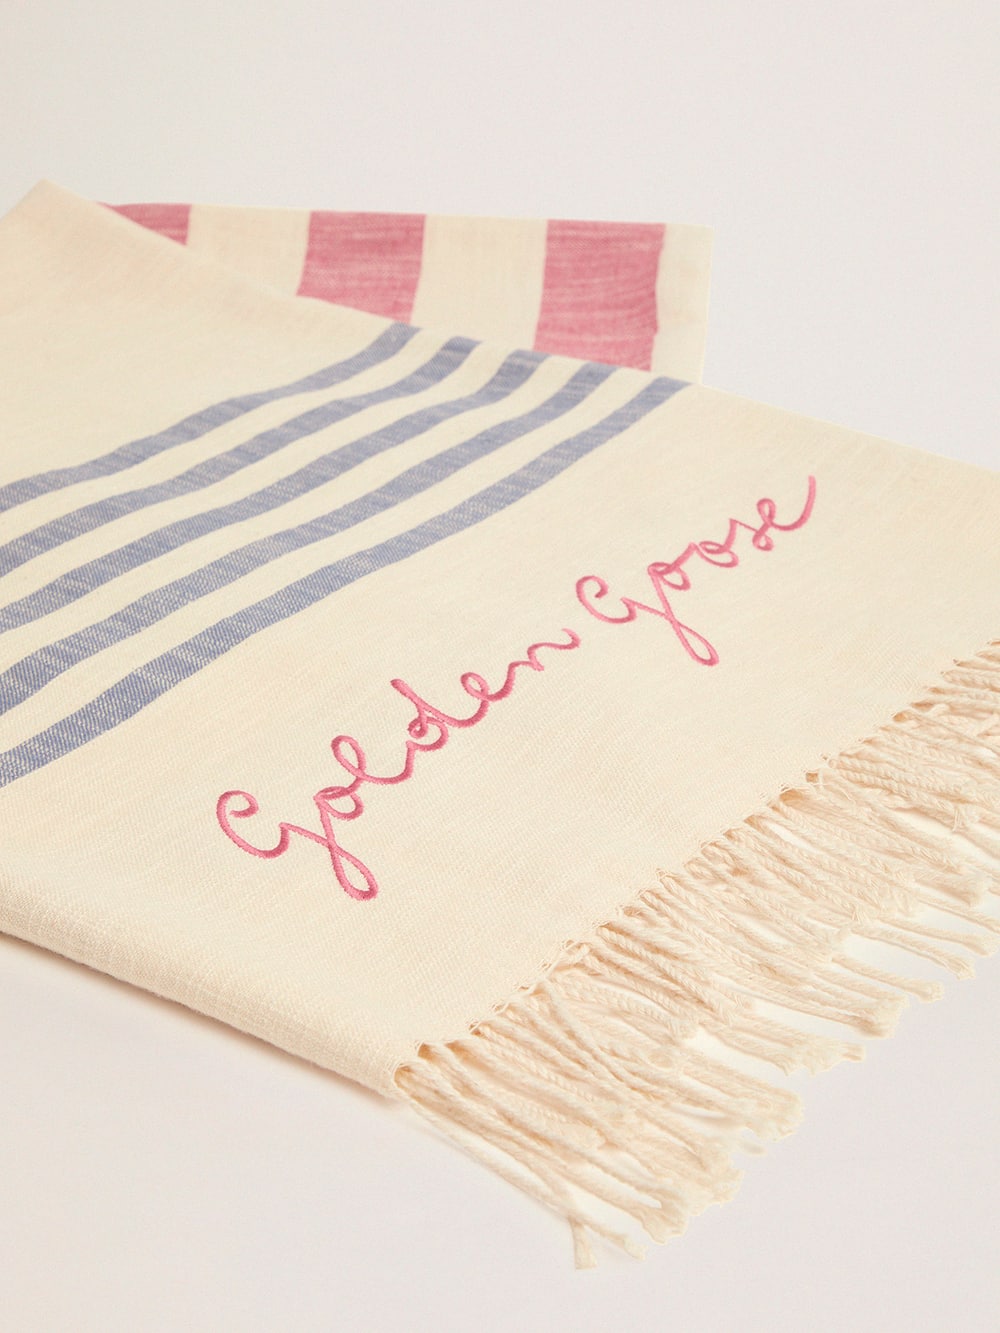 Golden Goose - Egeo Golden Resort Capsule Collection cotton beach towel in vintage white with red and blue stripes and braided fringes at the bottom in 